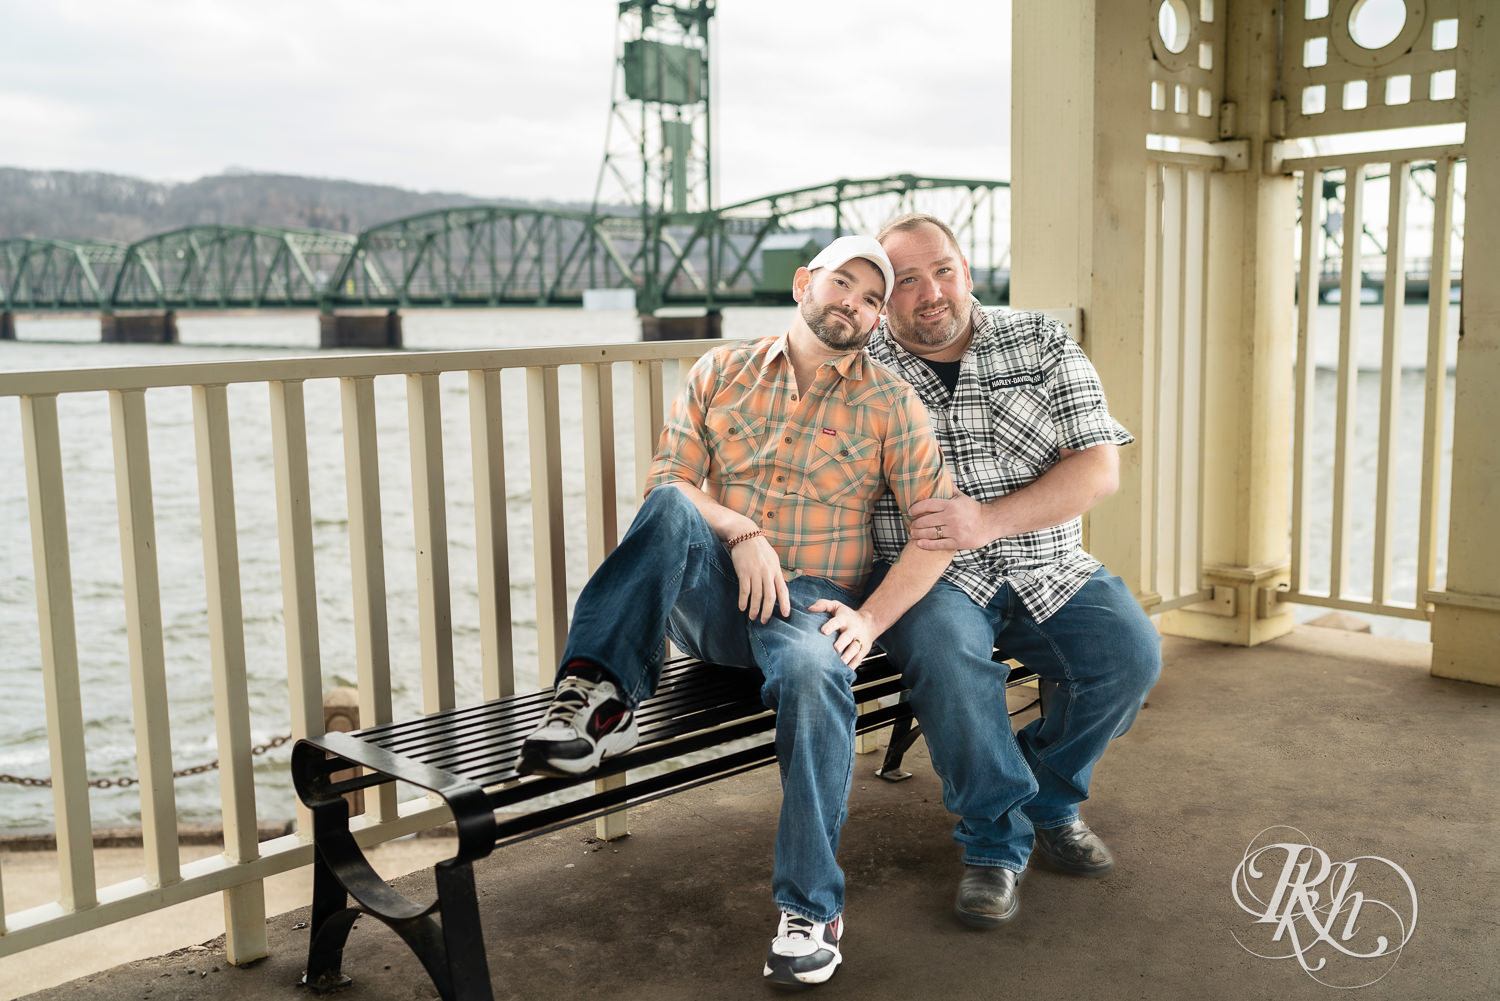 Two men in flannels and jeans smile on a bench during engagement photography in Stillwater, Minnesota.